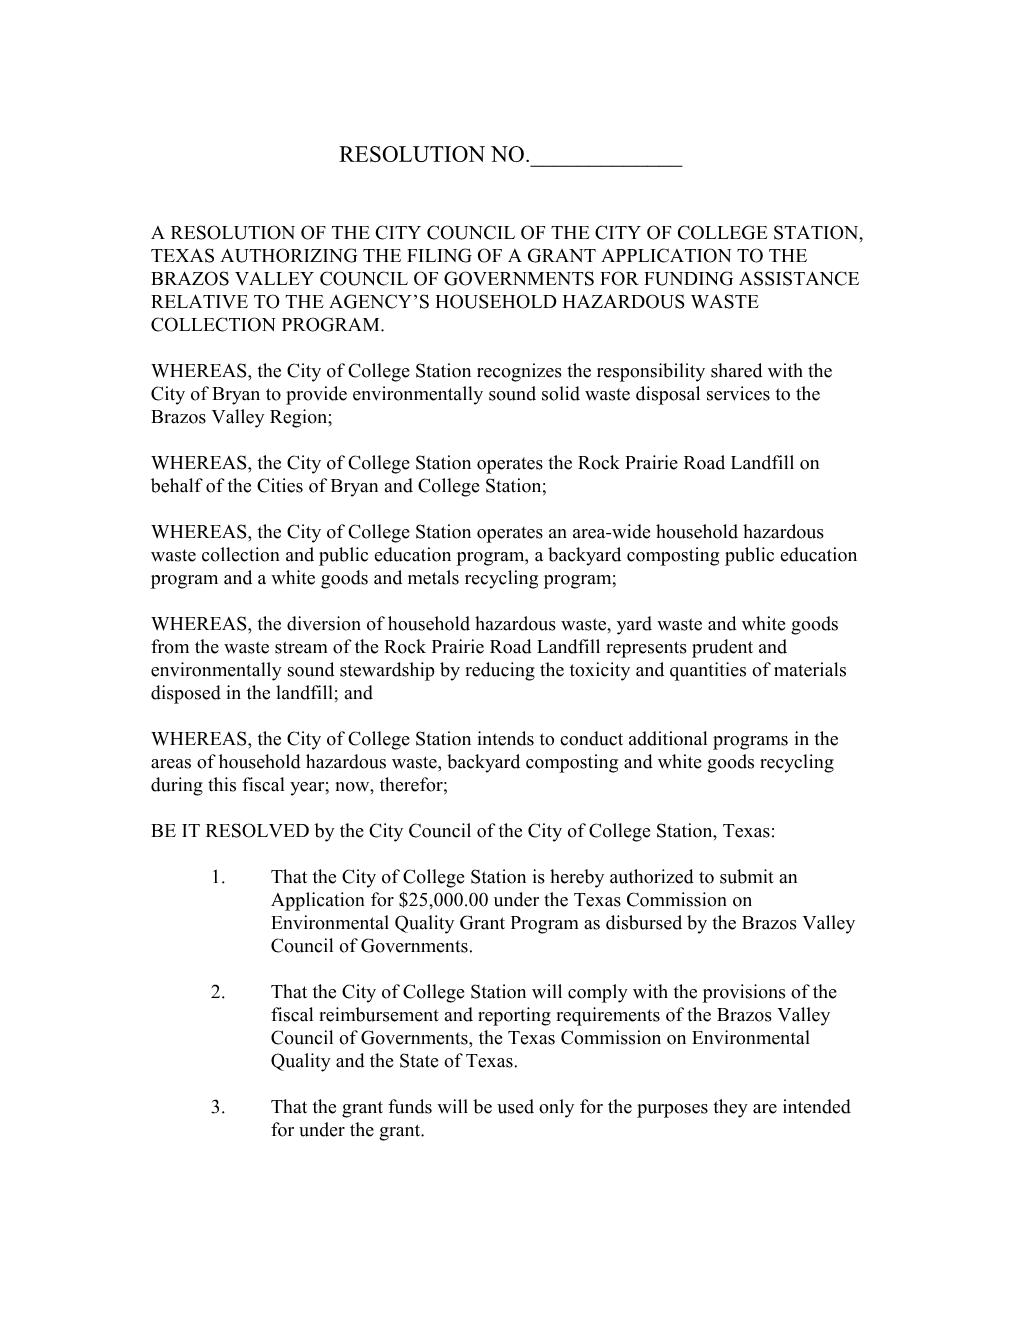 A Resolution of the City Council of the City of College Station, Texas Authorizing The